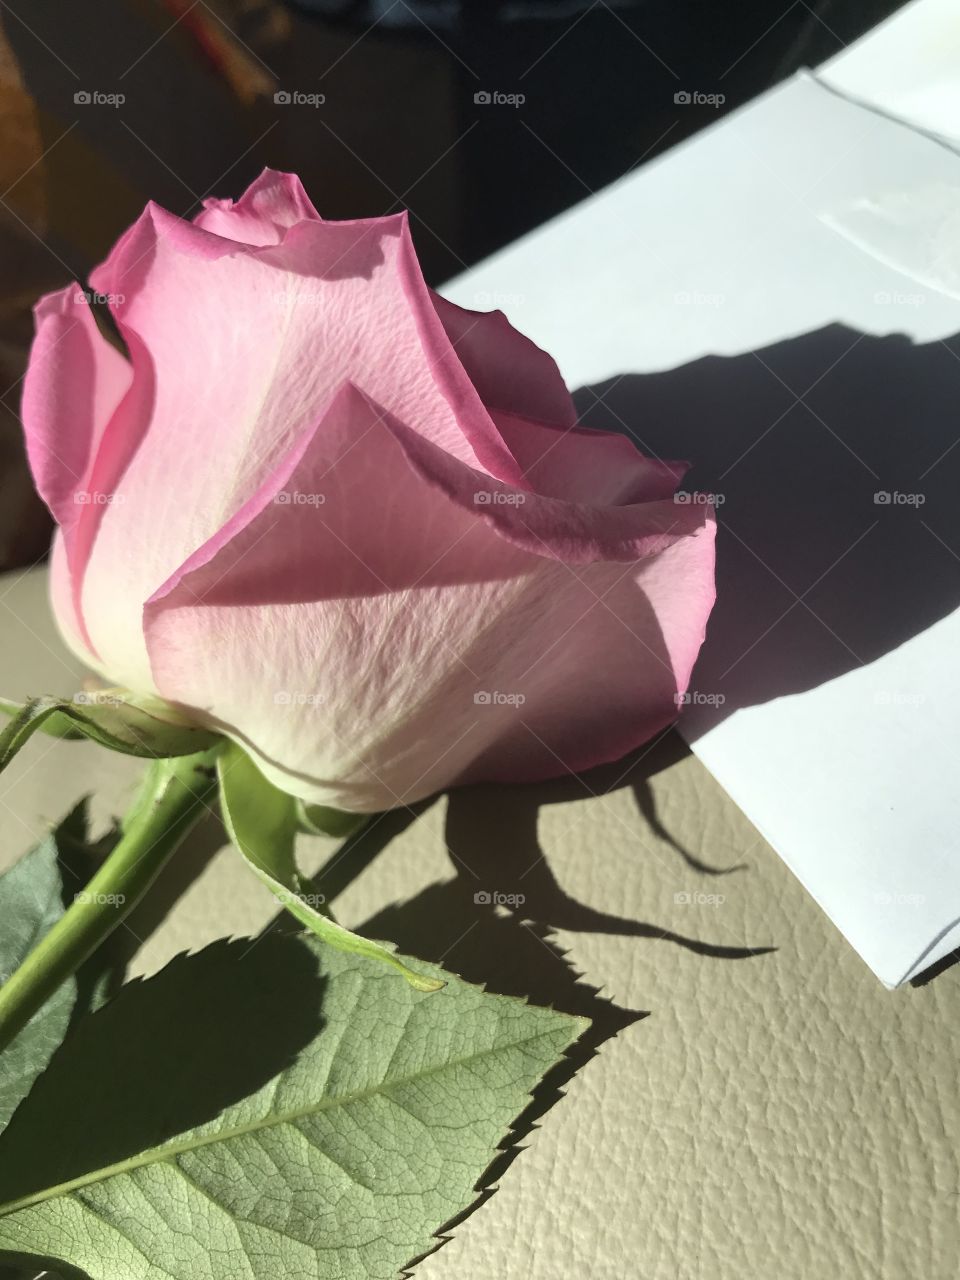 tried to be aesthetic with a pink rose; details on petals, interesting lighting